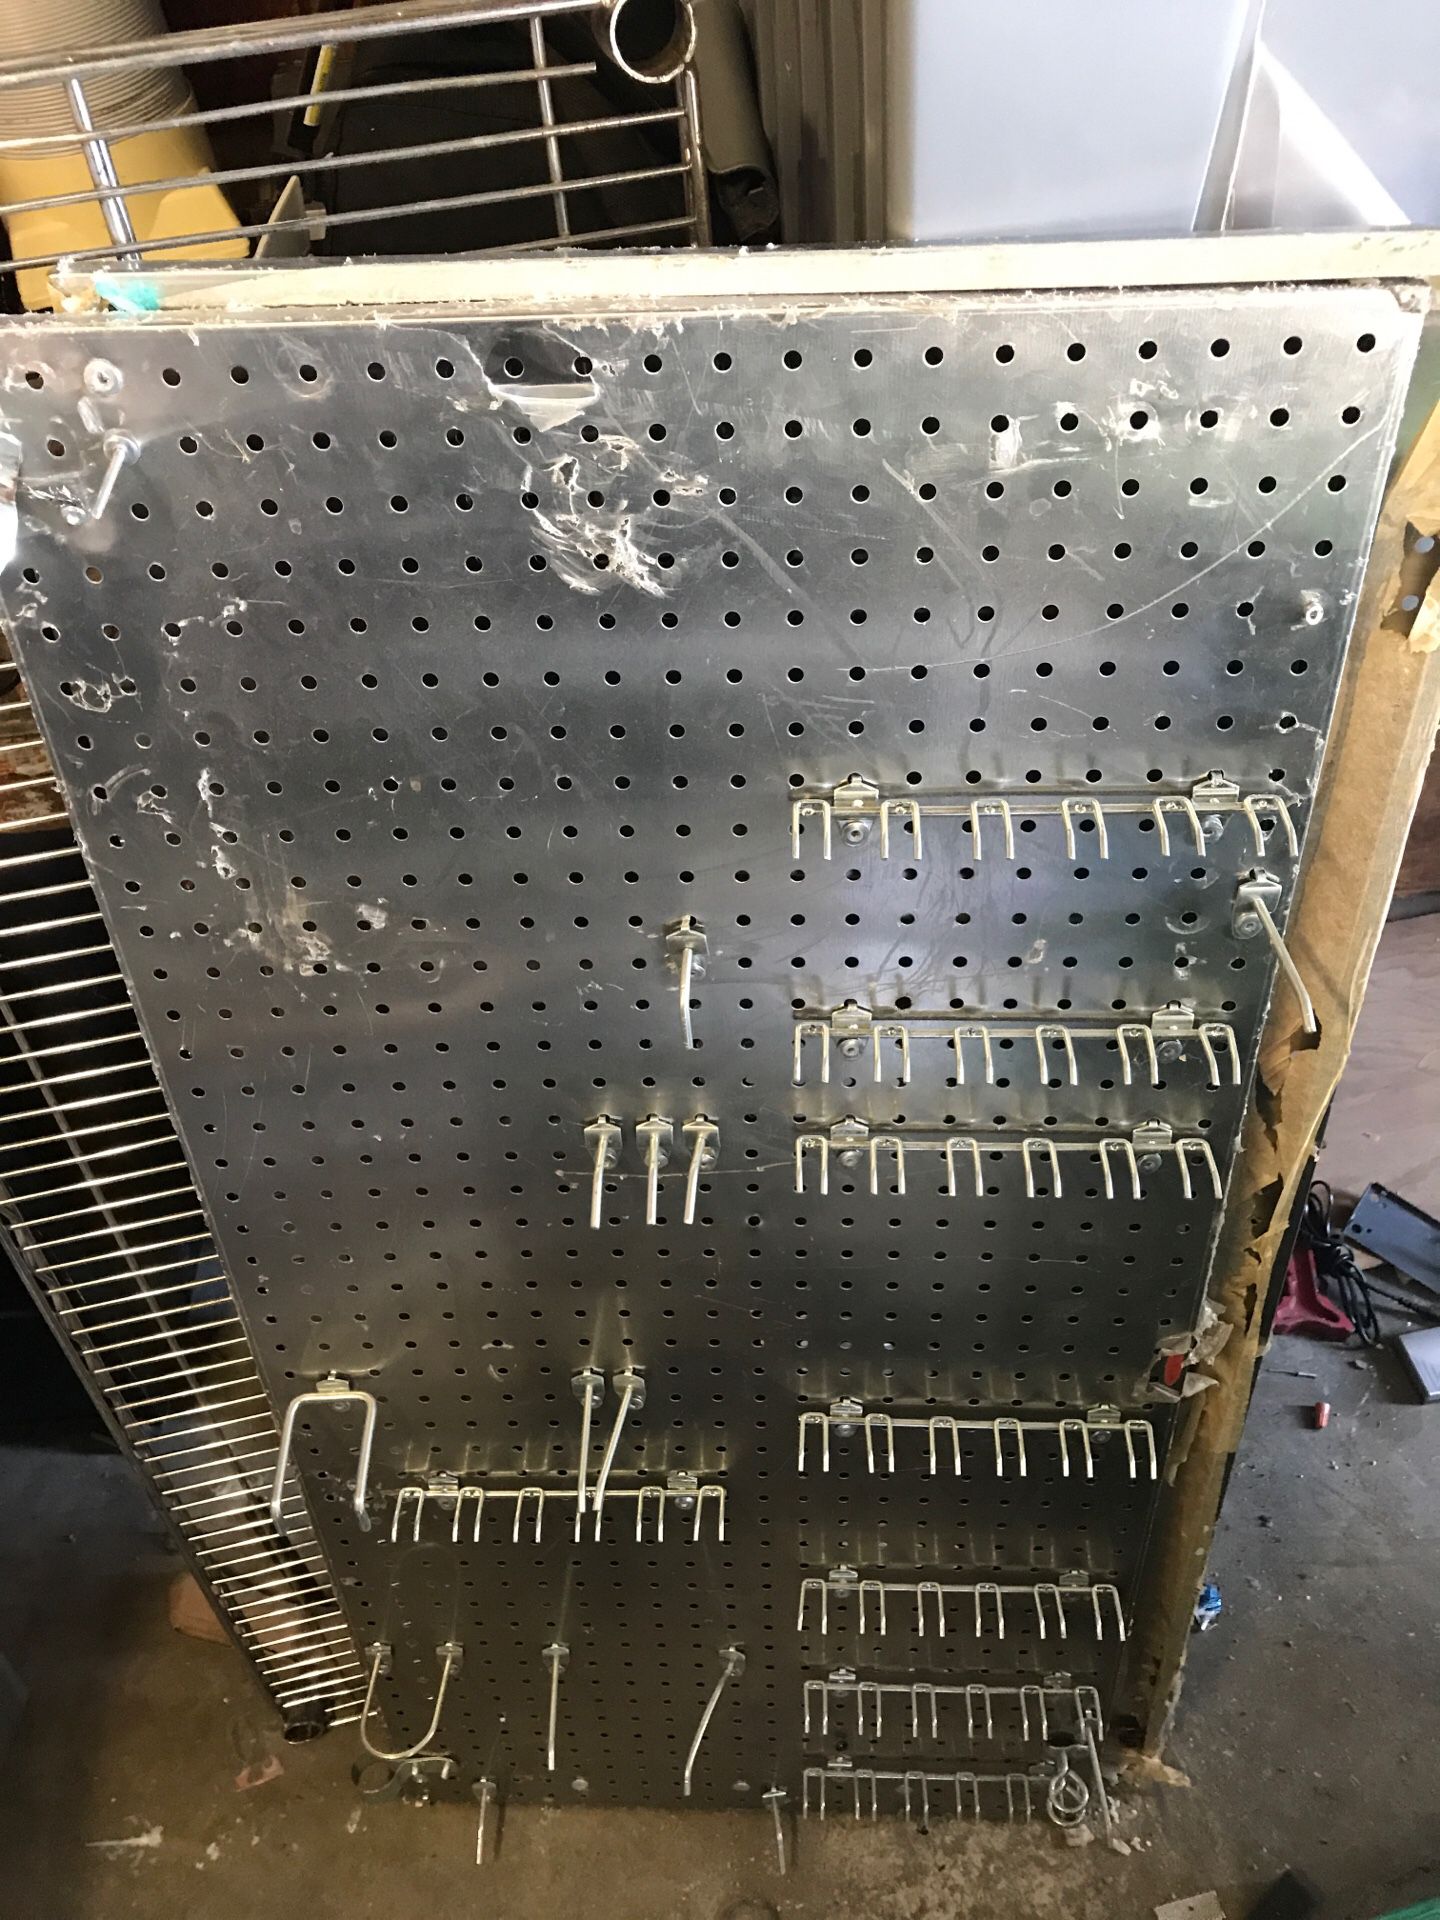 Stainless steel pegboard with random pegs